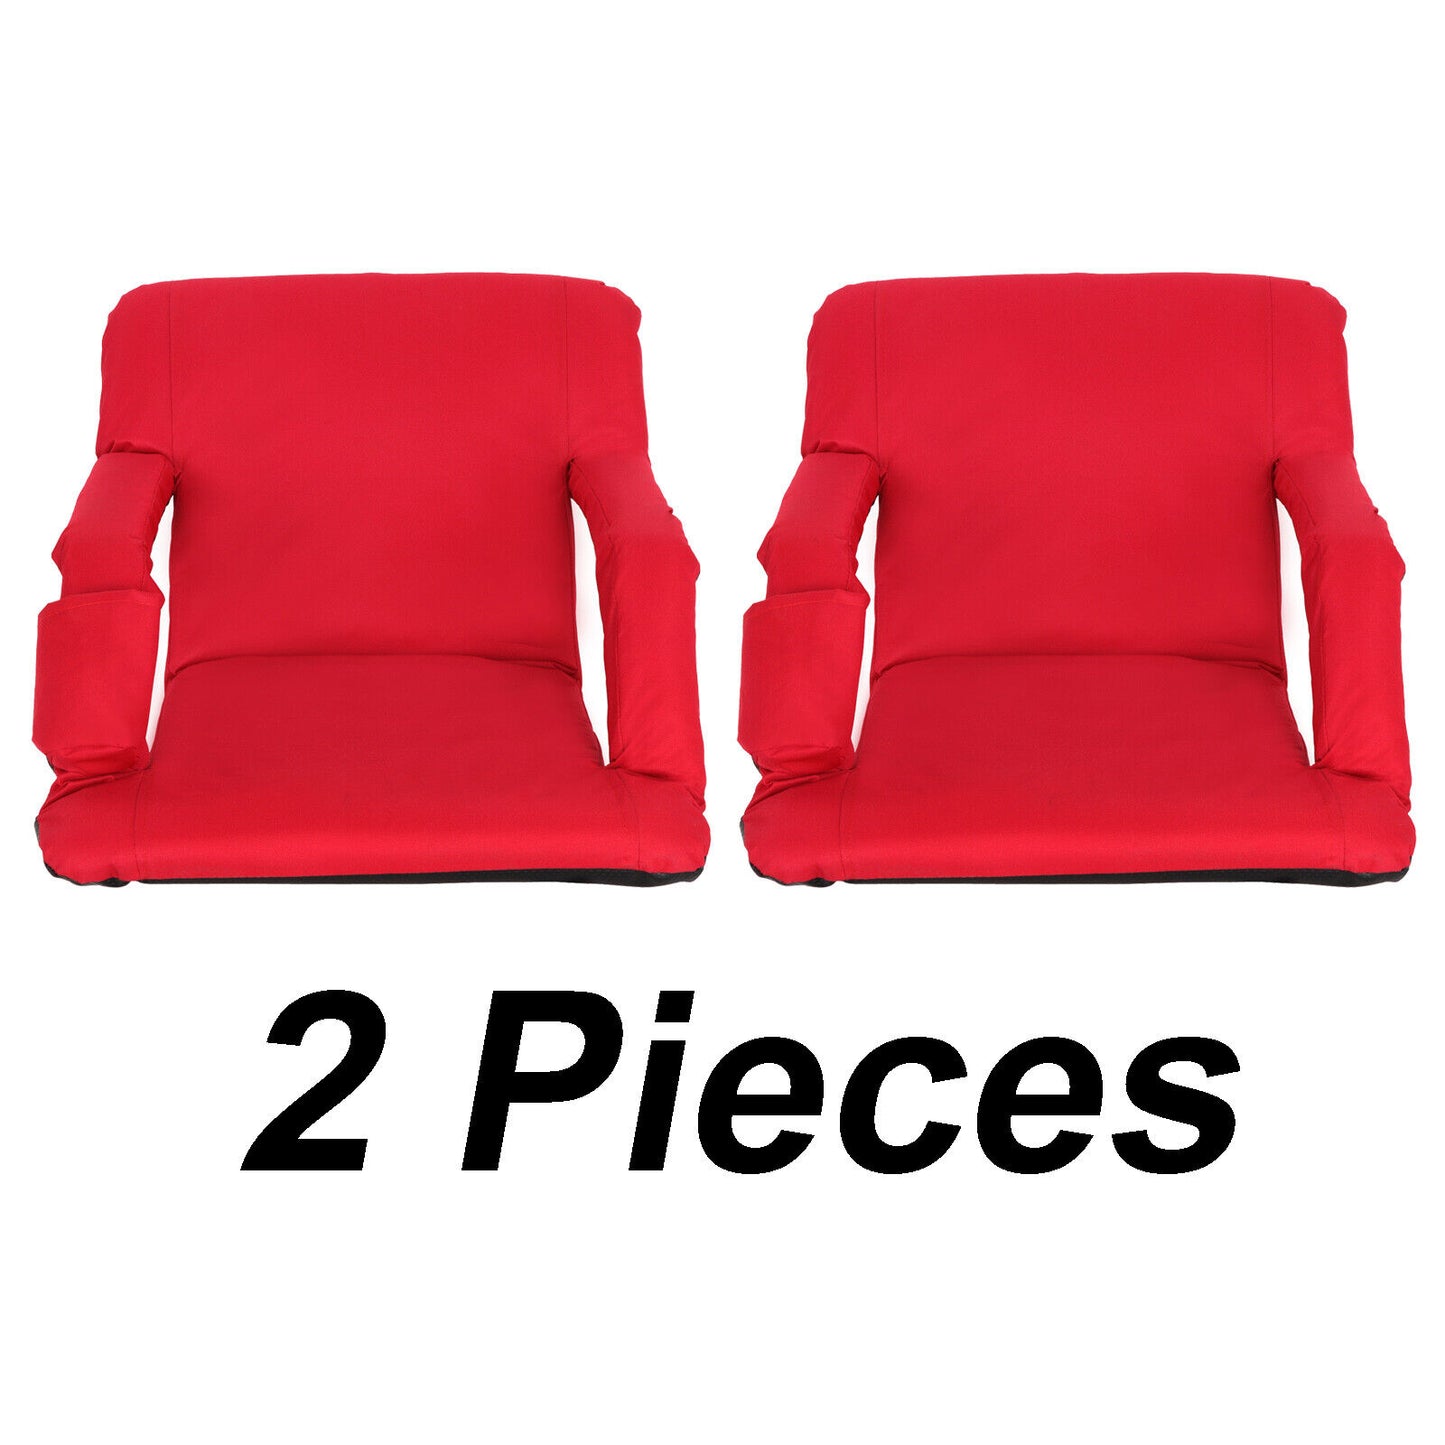 2PCS Red Wide Stadium Seats Chairs for Bleachers Benches 5 Reclining Positions